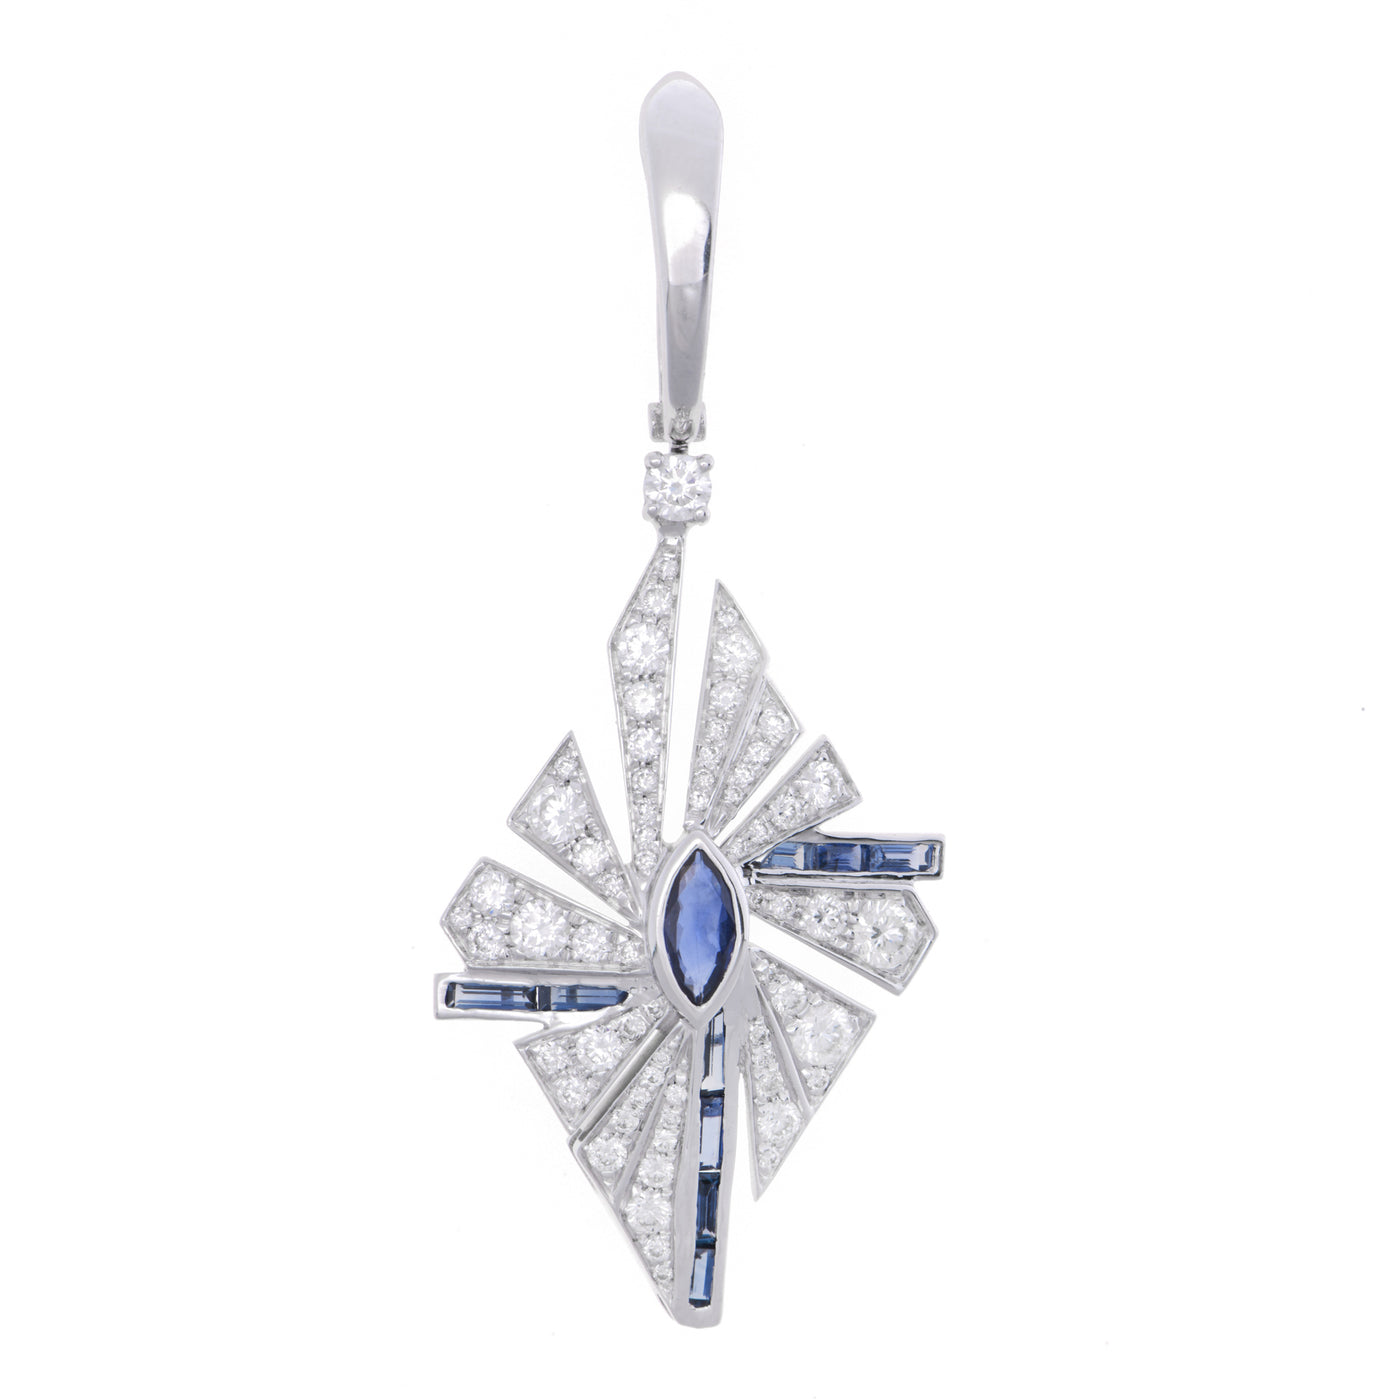 White Gold pointed thick rays Diamond Earrings With Natural Sapphire